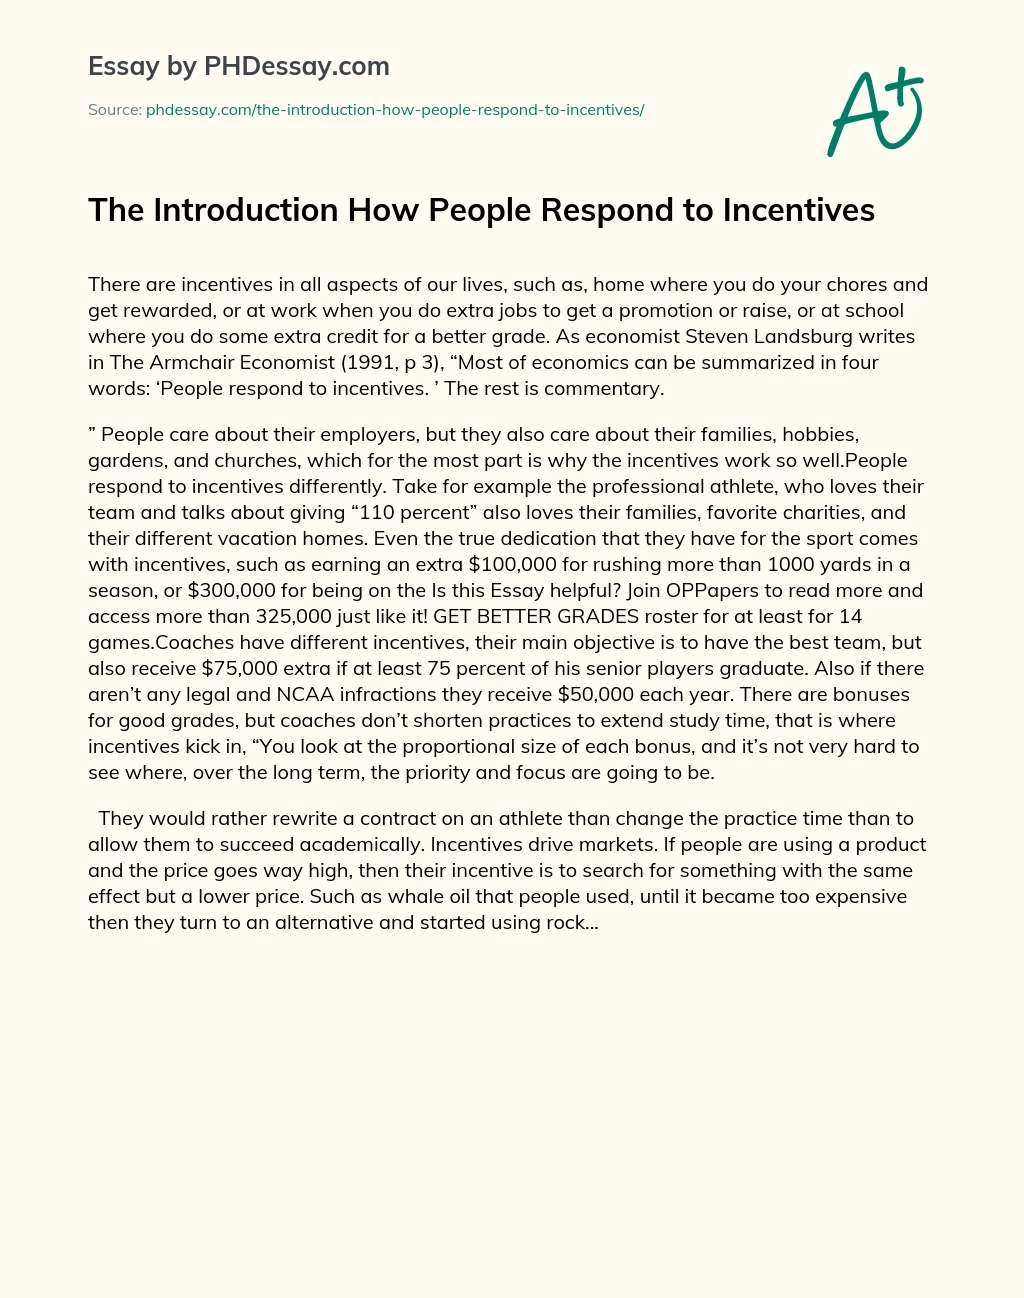 The Introduction How People Respond to Incentives essay